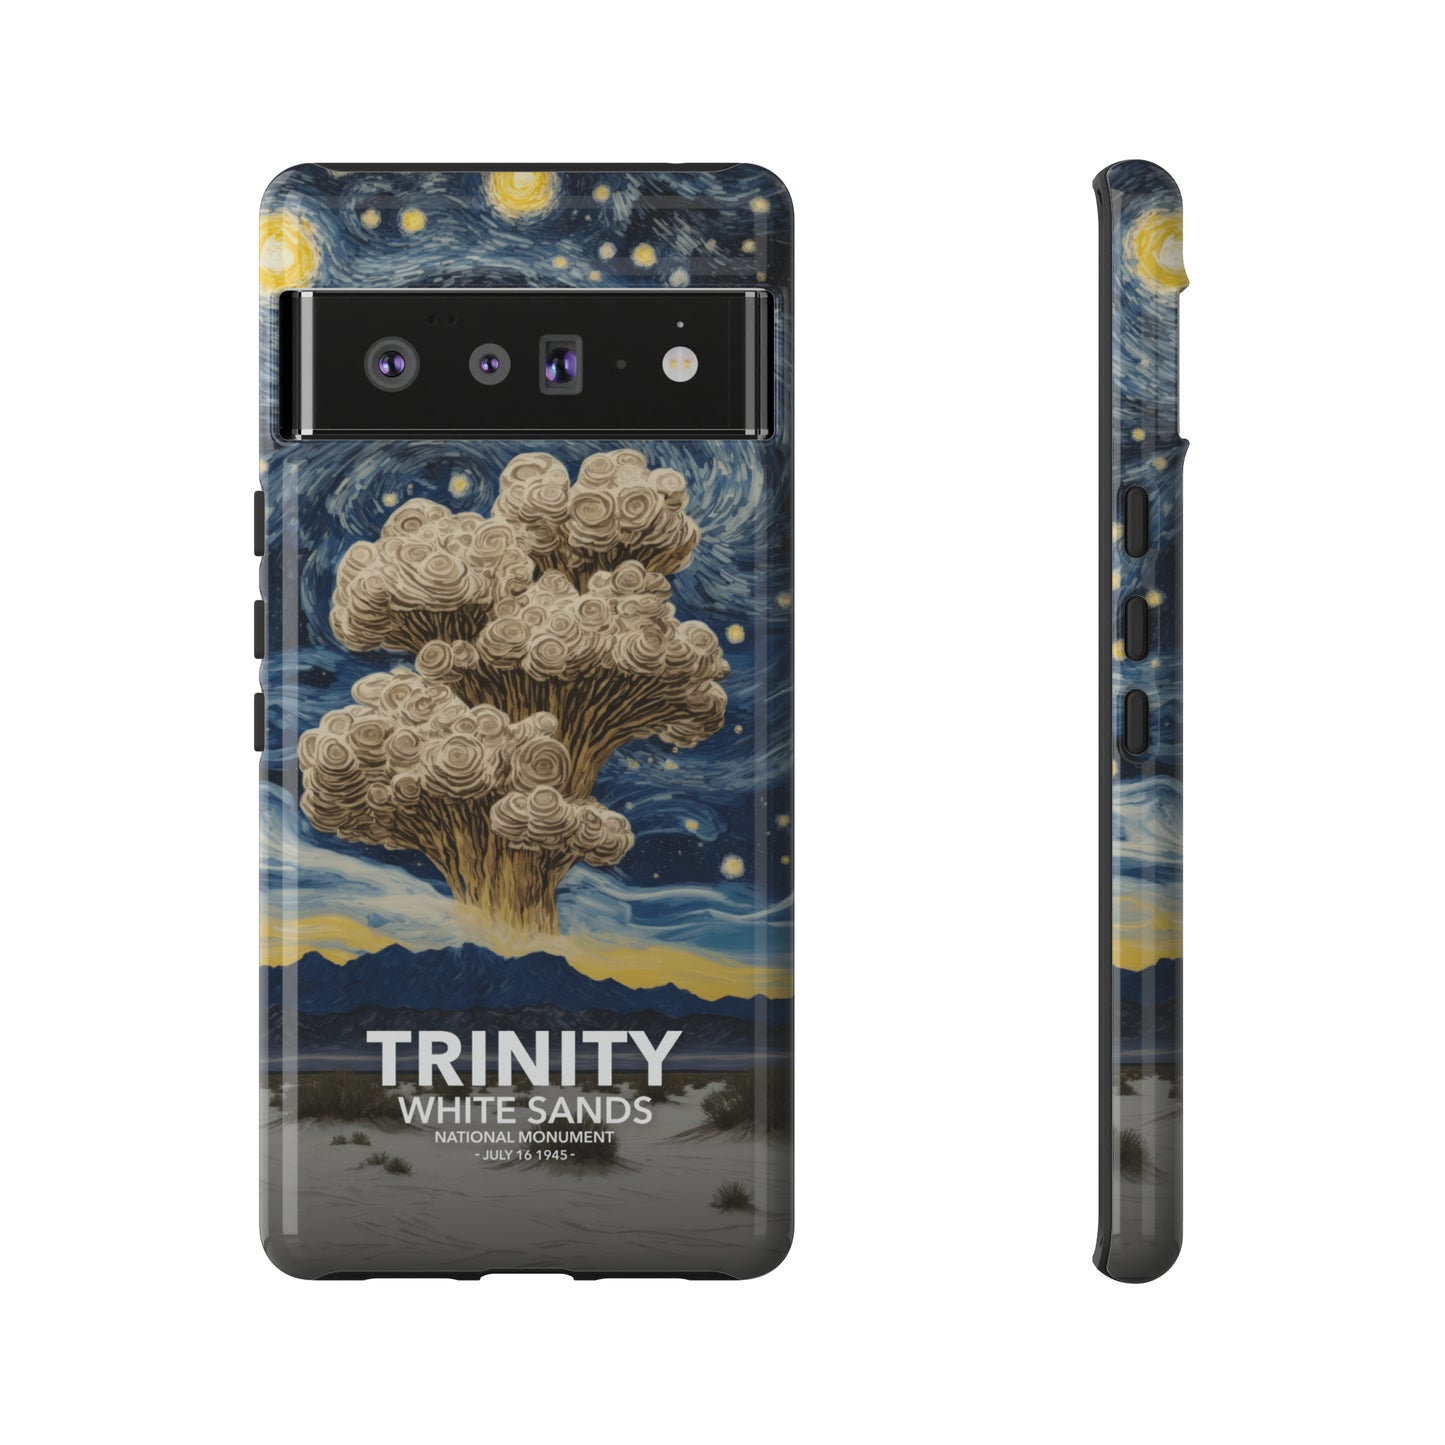 White Sands National Park Phone Case - Starry Night Trinity Test